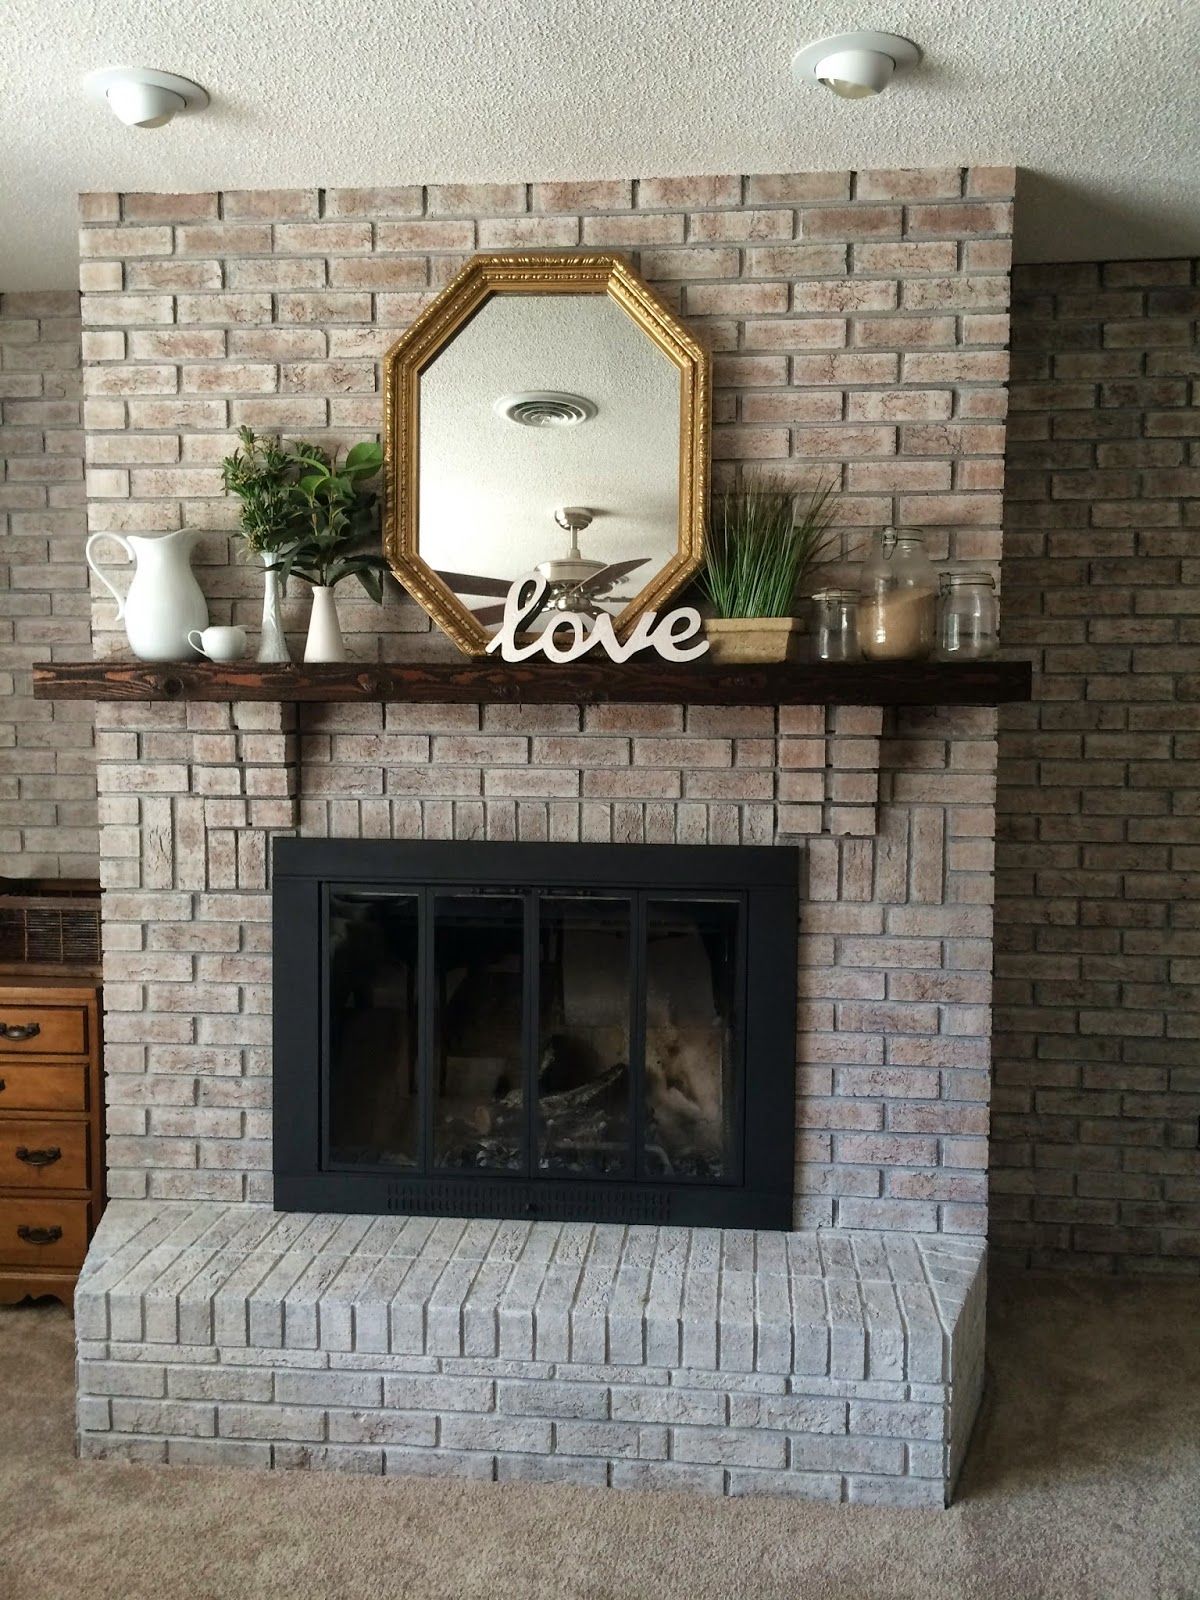 Update Brick Fireplace Luxury White Washing Brick with Gray Beige Walking with Dancers